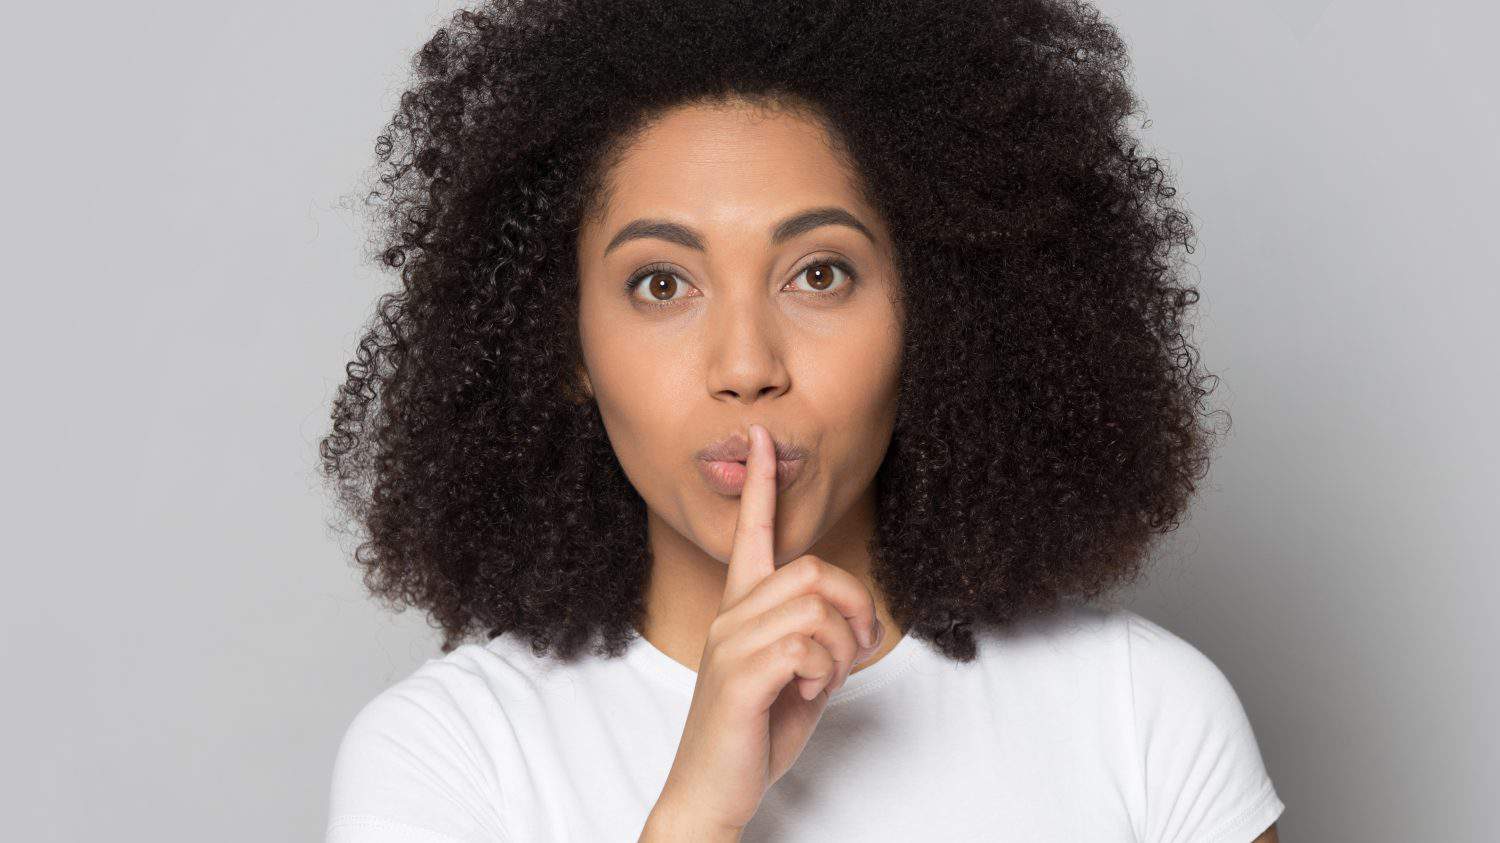 Portrait of young African American woman isolated on grey studio background keep finger at lips tell secret. Millennial female share secret good sale deal or promotion discount to clients.